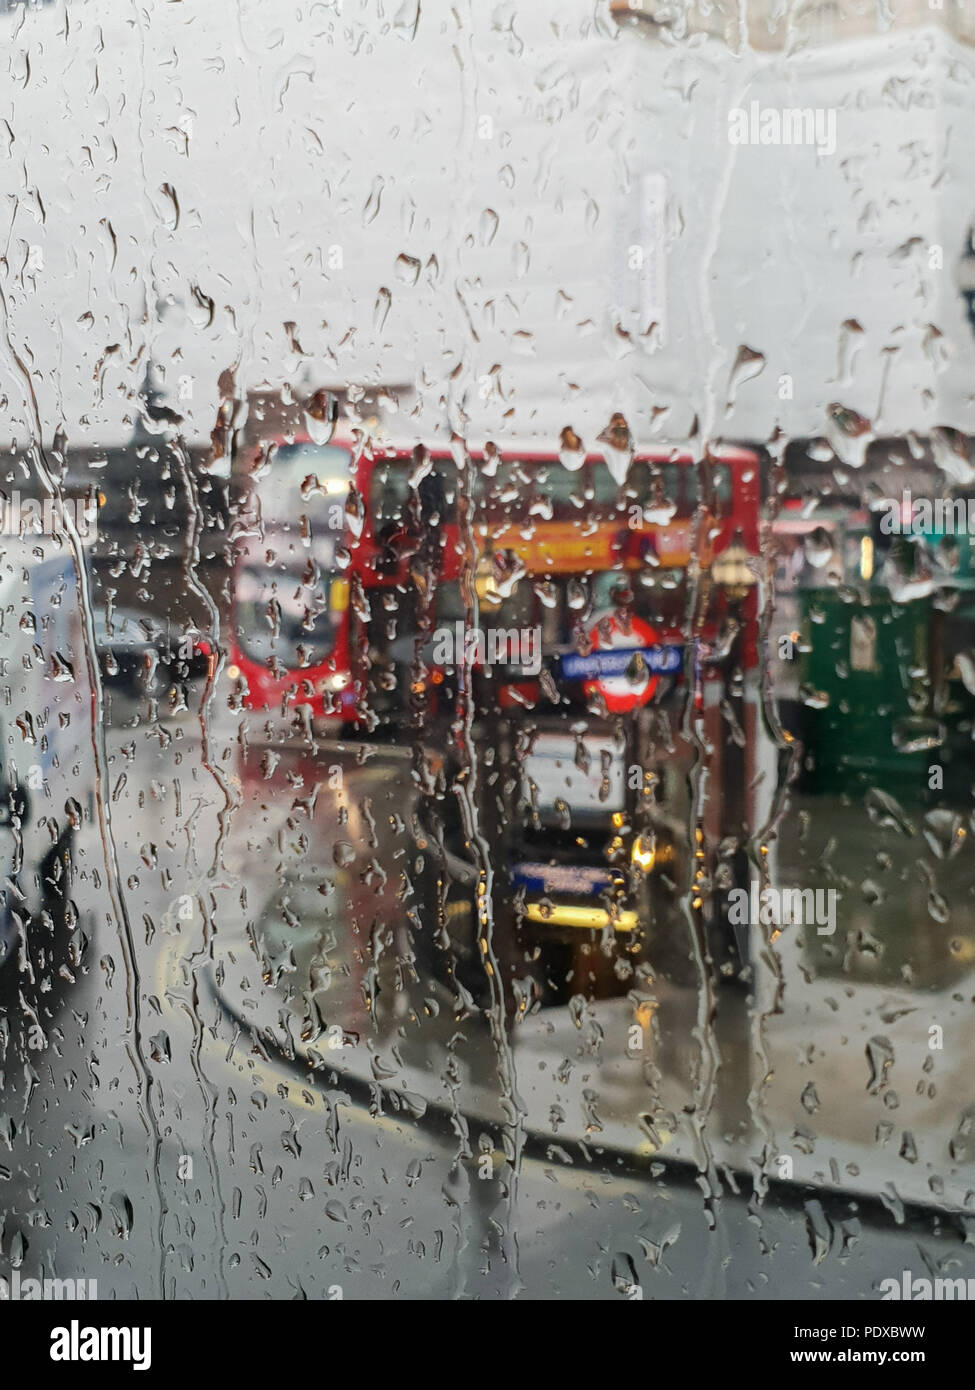 Regents Street. London. UK 10 Aug 2018 - View of London's Regent Street and red double decker bus through a bus window during heavy rainfall in central London.   Credit Roamwithrakhee /Alamy Live News Stock Photo